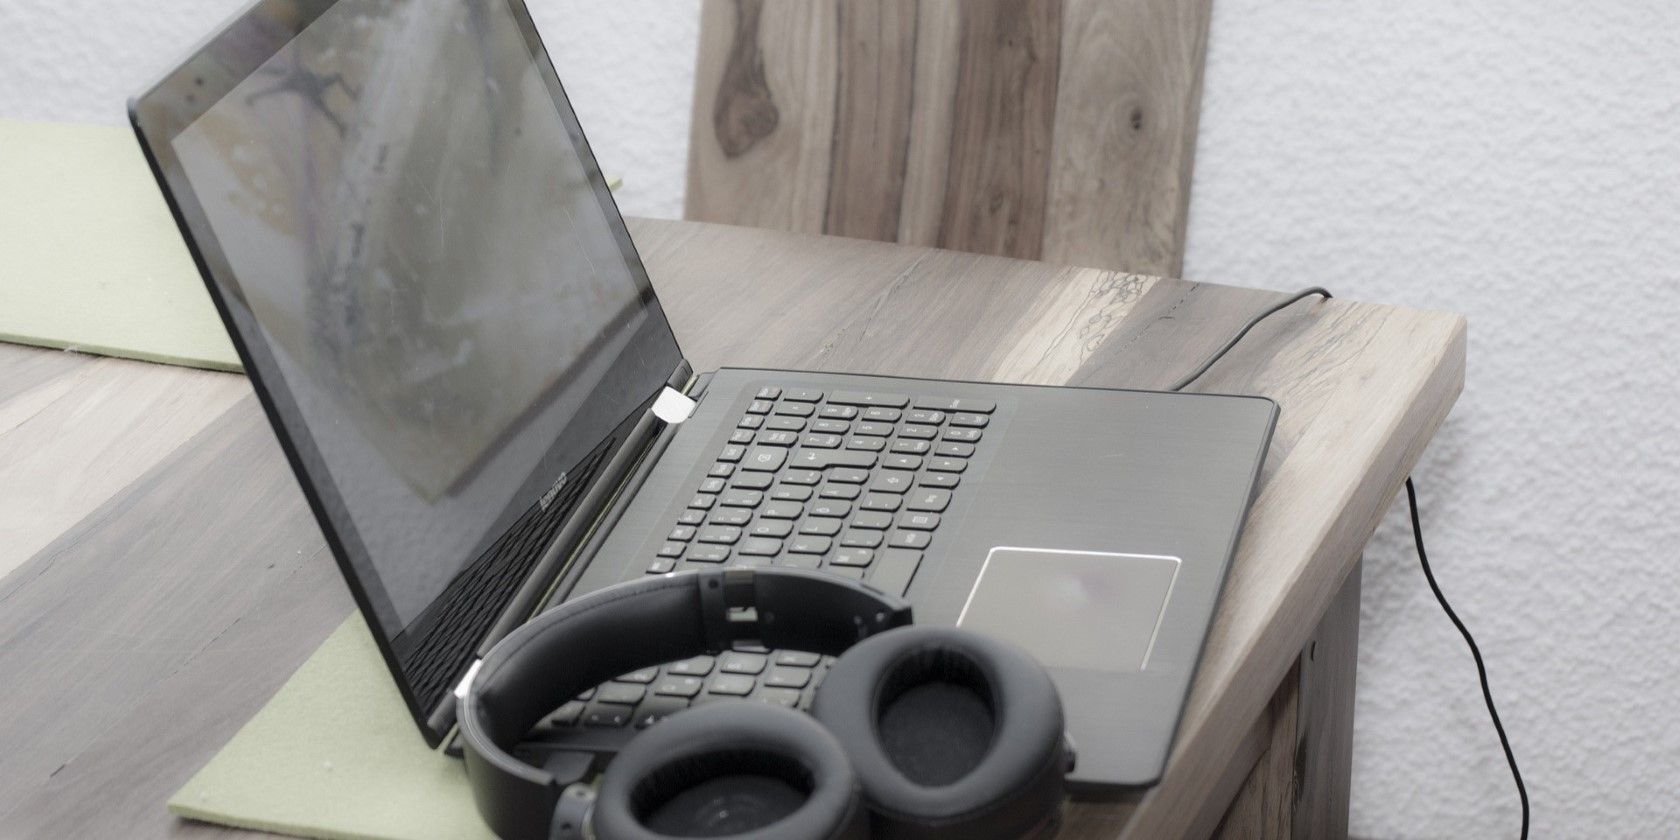 A Windows laptop on a table with headphone